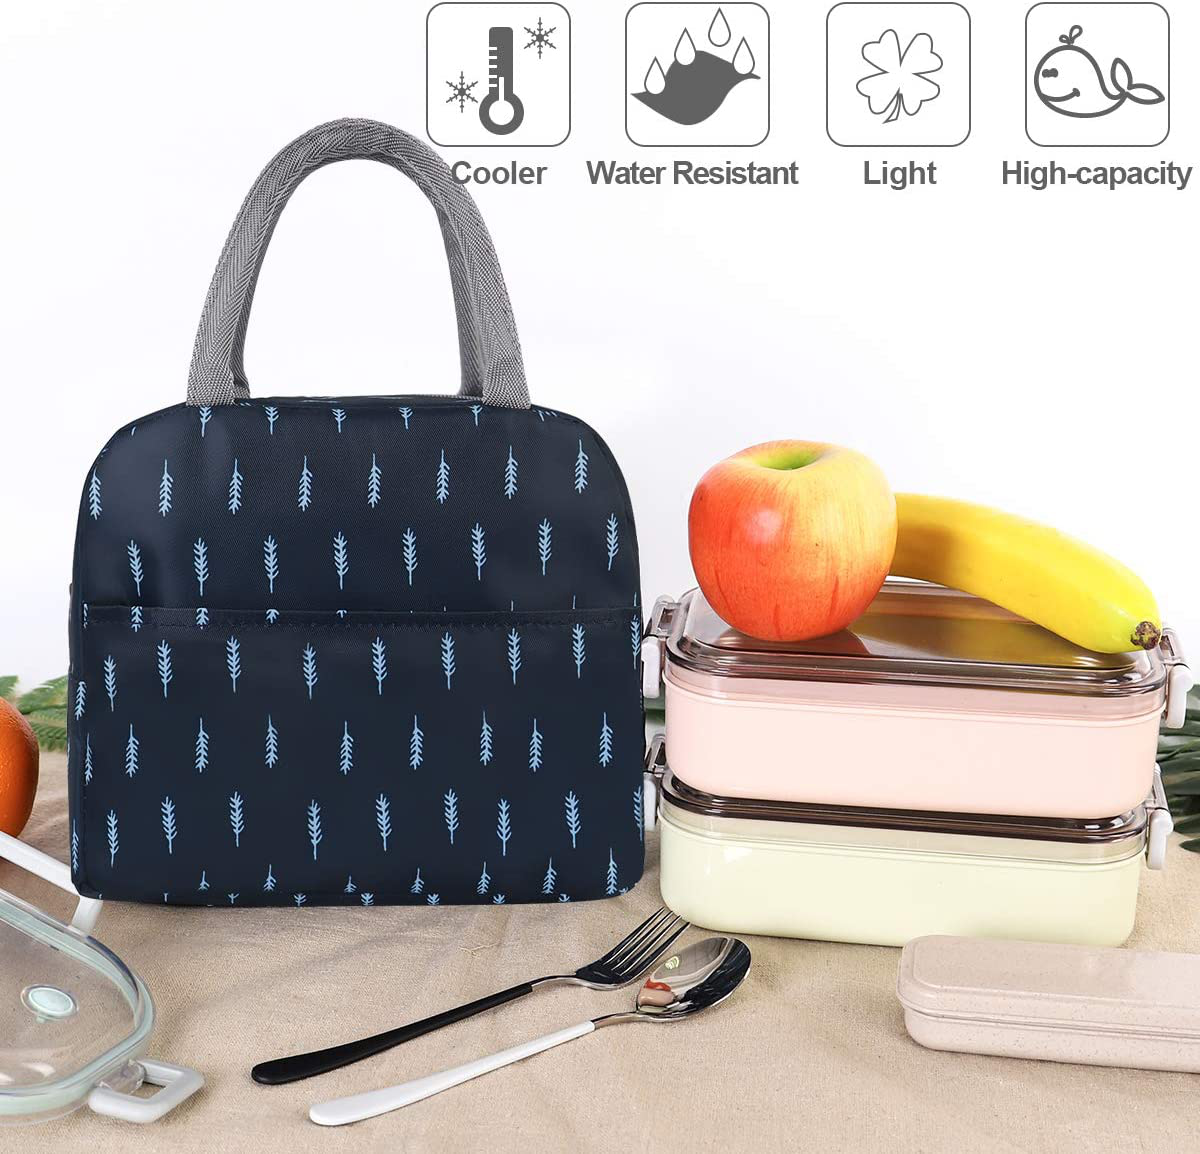 Buringer Reusable Insulated Lunch Bag Cooler Tote Box with Front Pocket Zipper Closure for Woman Man Work Picnic or Travel (Dark Blue White Strip，Large Size)